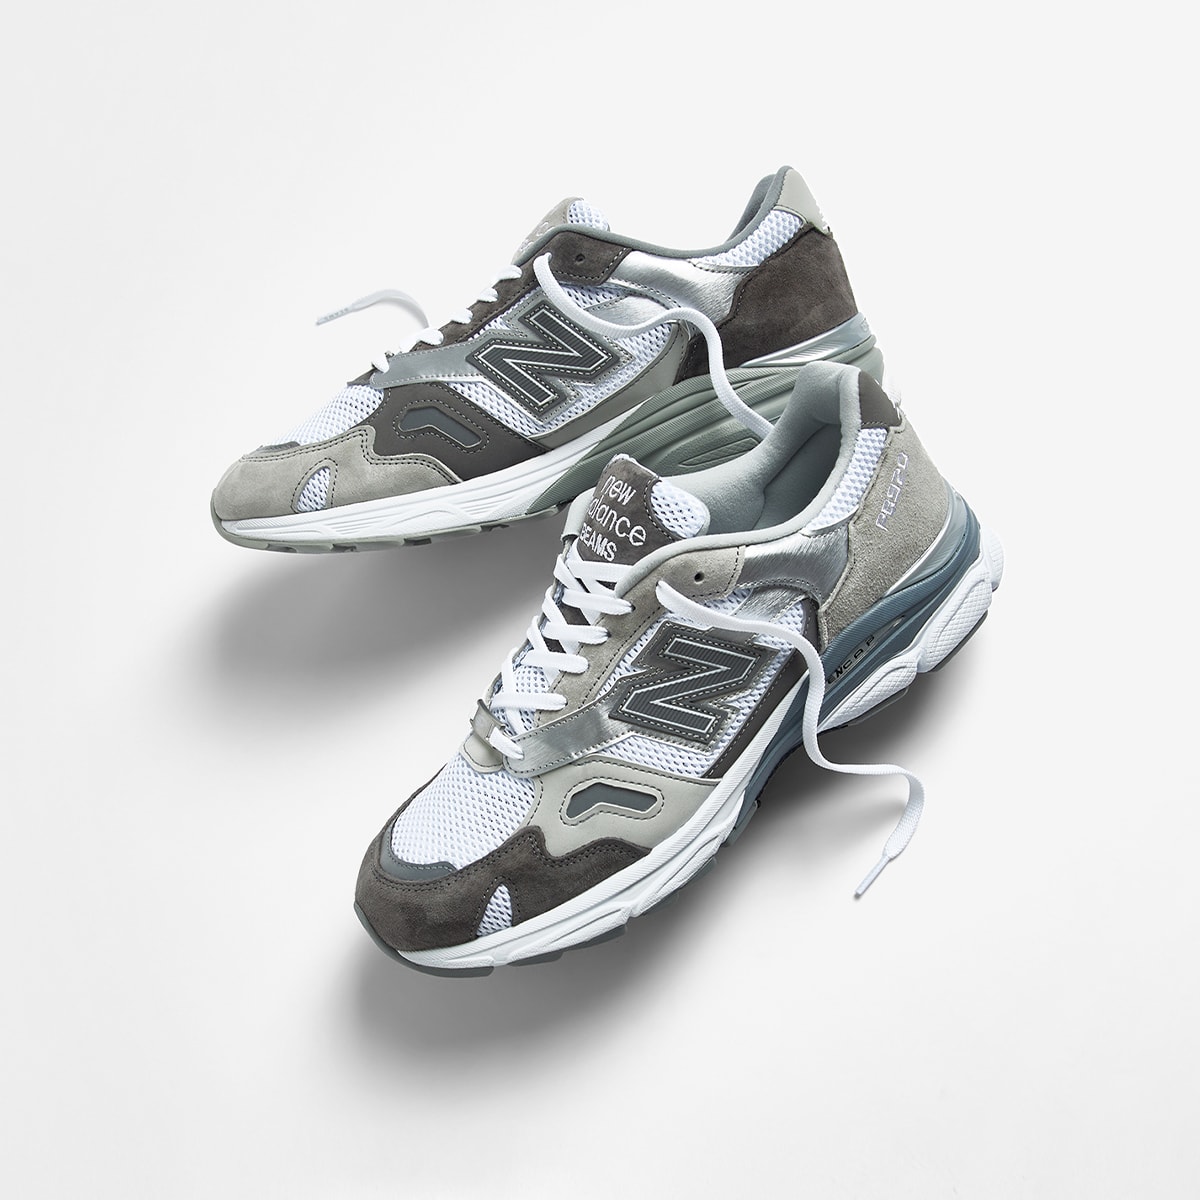 New Balance x Beams x Paperboy M920PPB (Grey) | END. Launches